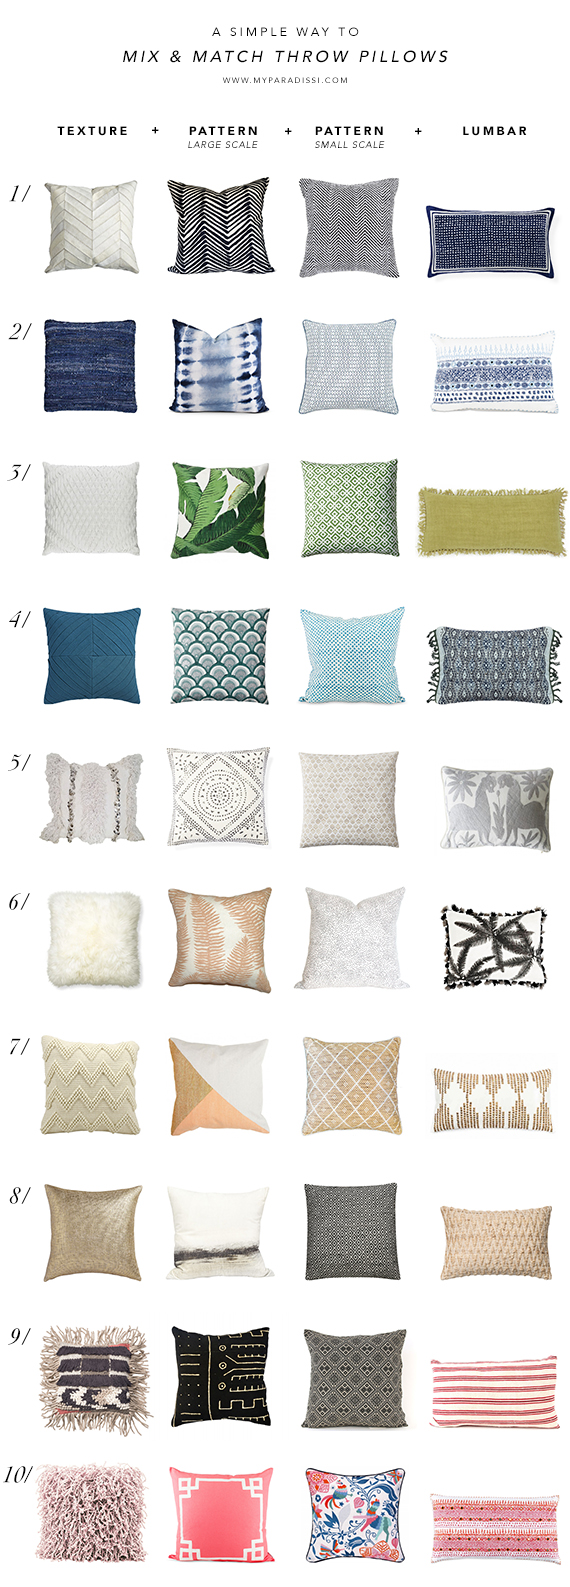 A simple way to mix and match throw pillows | My Paradissi